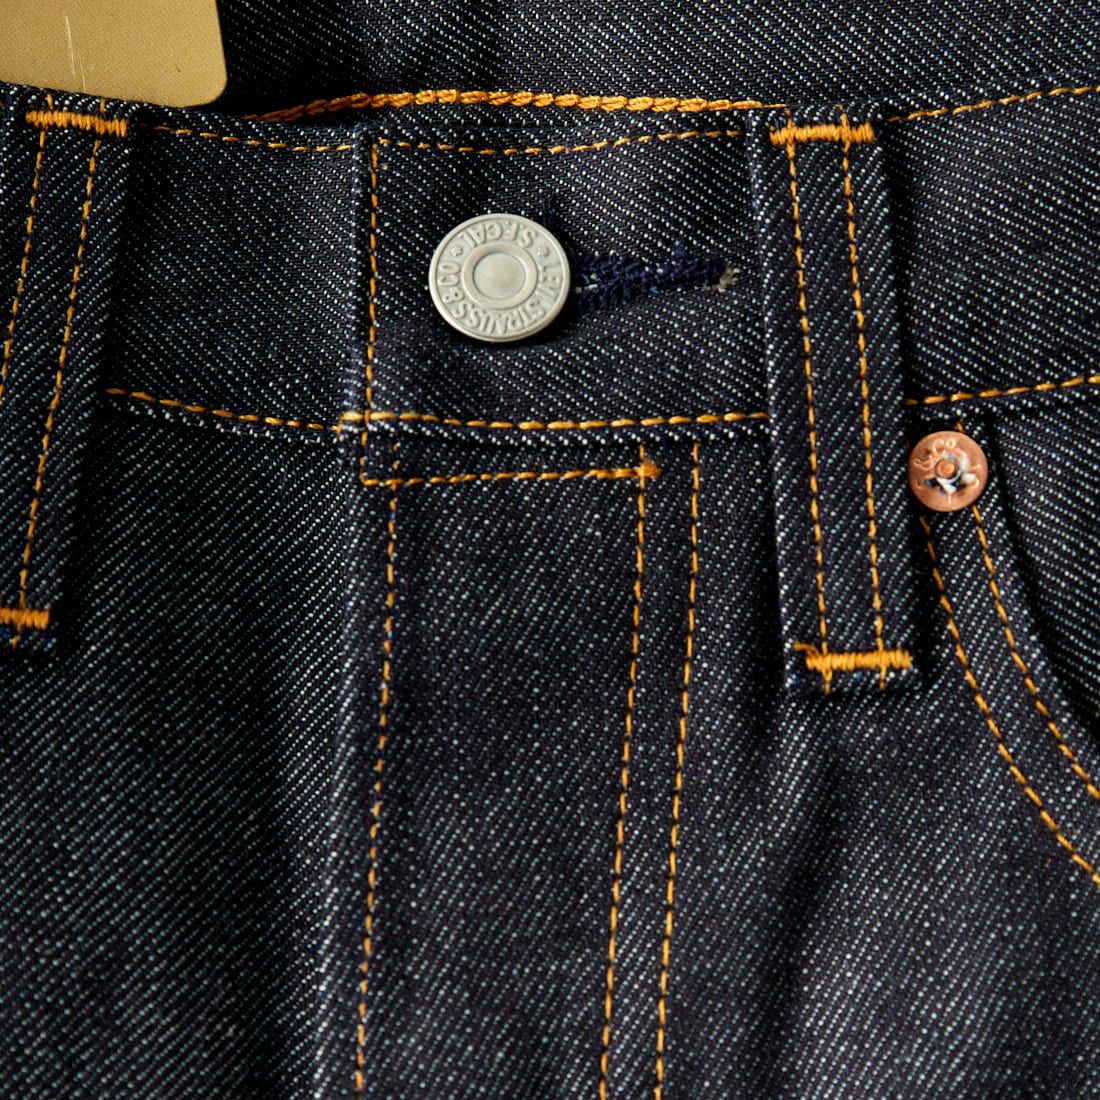 LEVIS Vintage Clothing [リーバイス ヴィンテージ クロージング] 1947年モデル501 [47501-02]